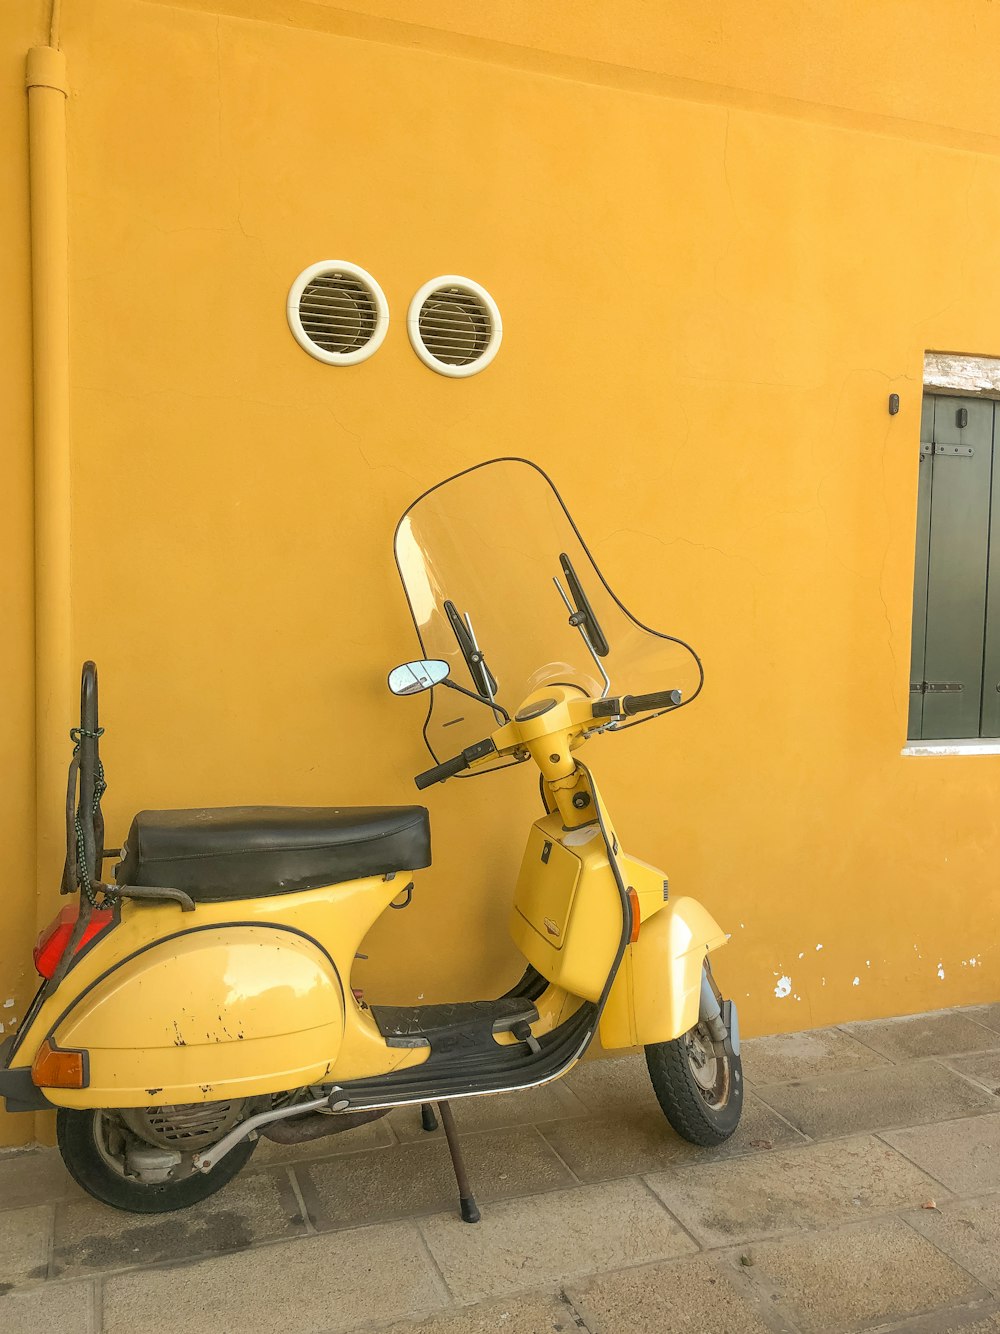 a yellow scooter parked next to a yellow building